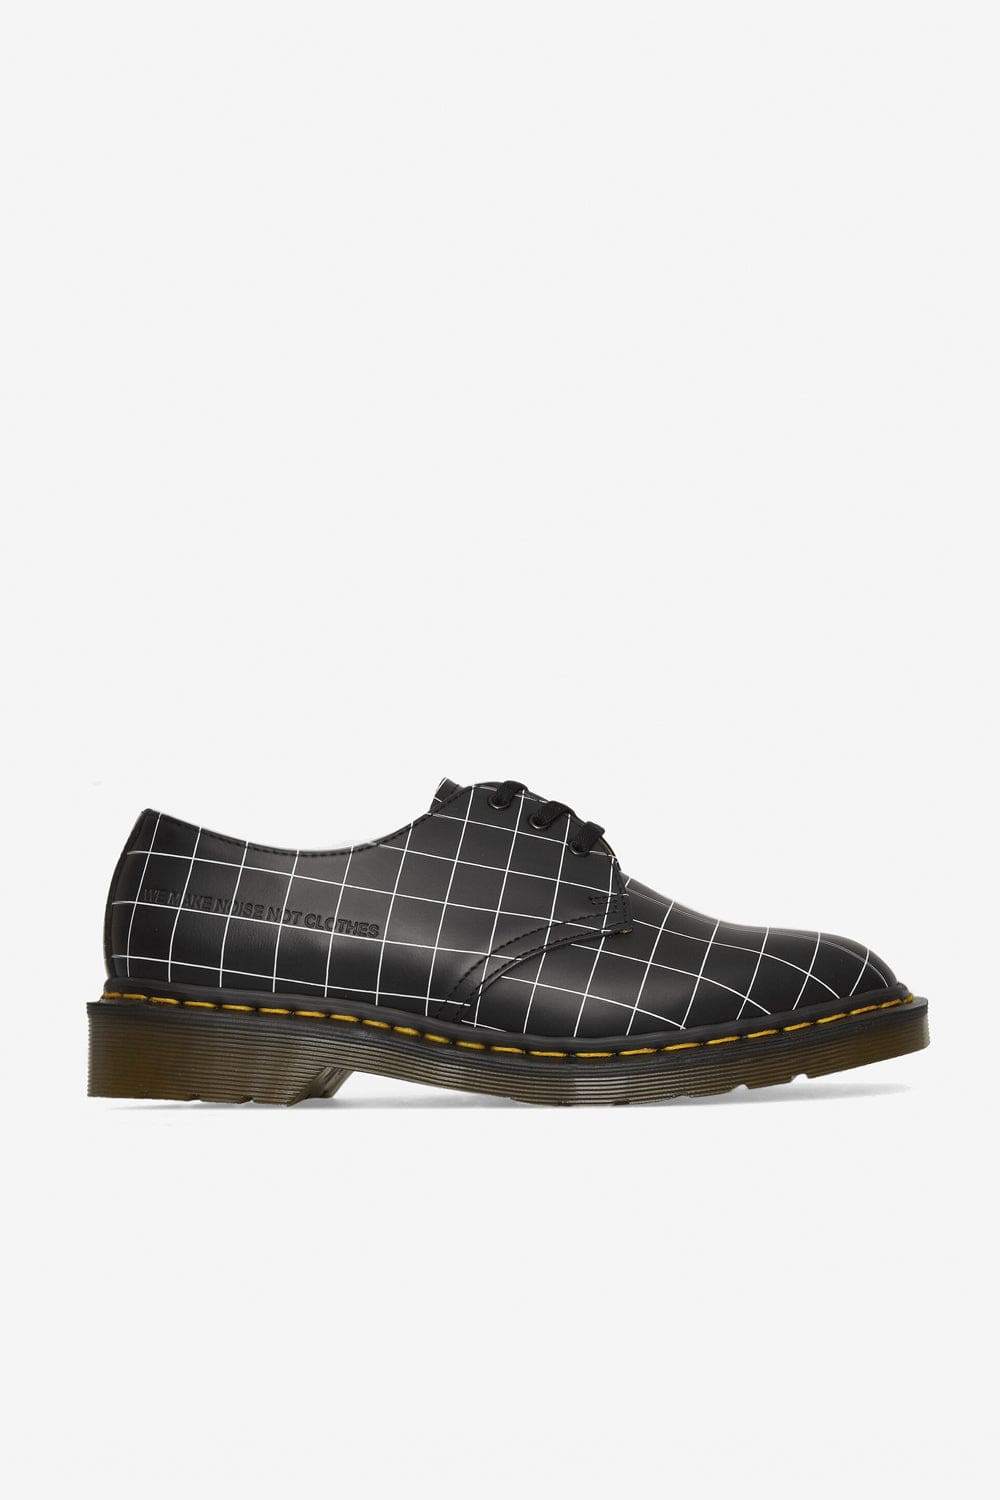 Dr. Martens x Undercover 1461 UC Check (Black Smooth)